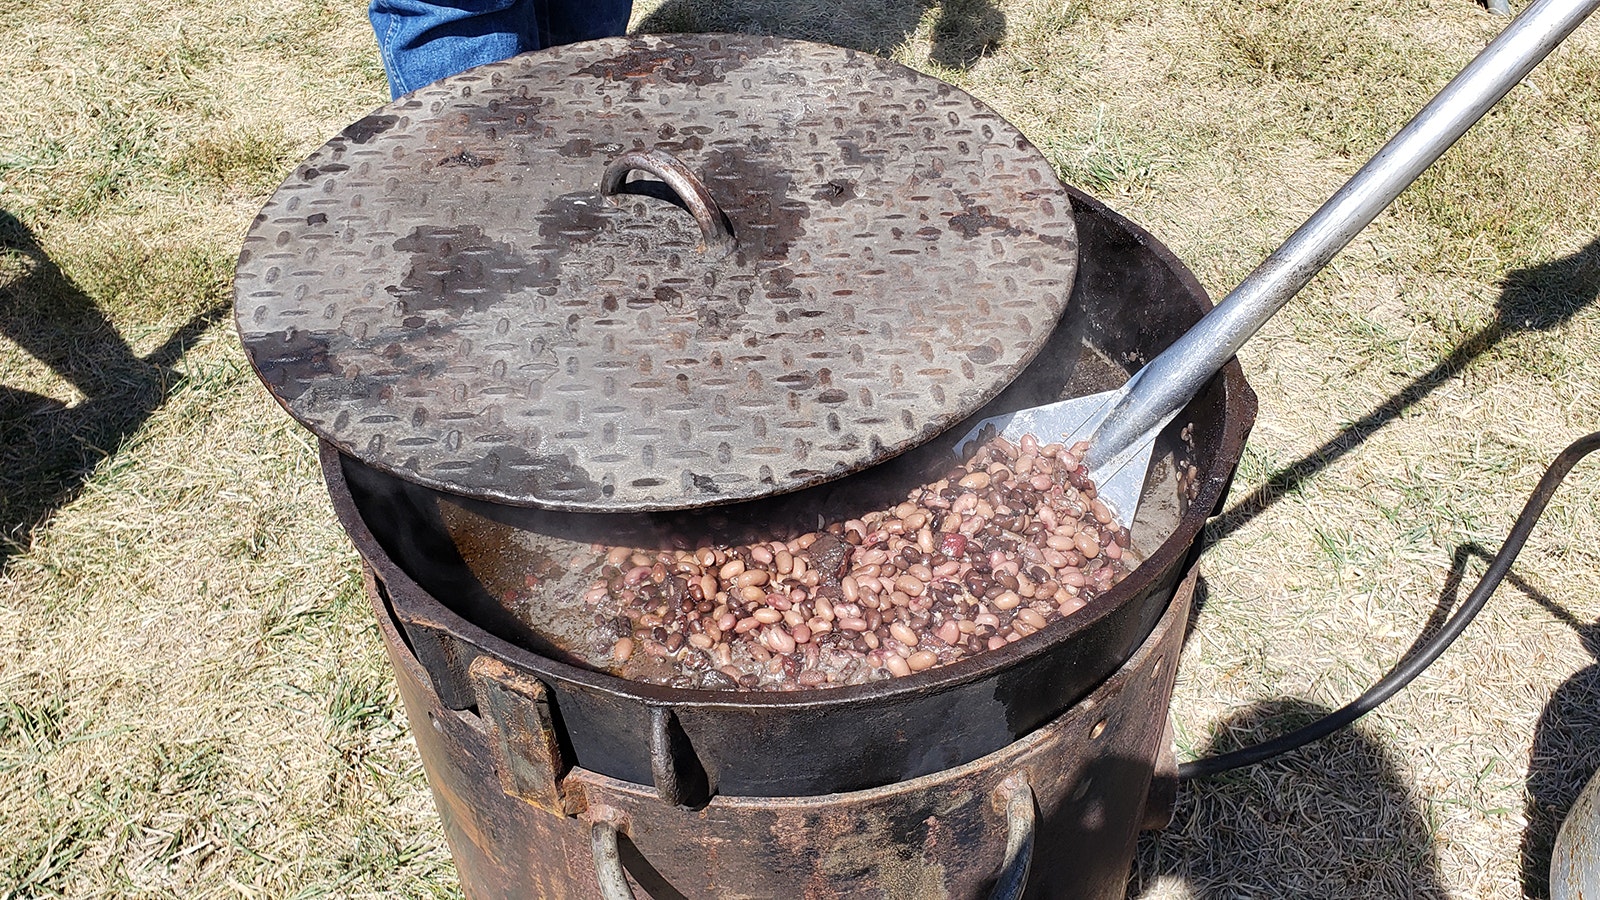 The magical pot of community beans has a different recipe every year based on whatever the cook pulls from the cupboard, or sometimes whatever the cook forgot to bring. This year's was smokey and salty with hint of bacon.